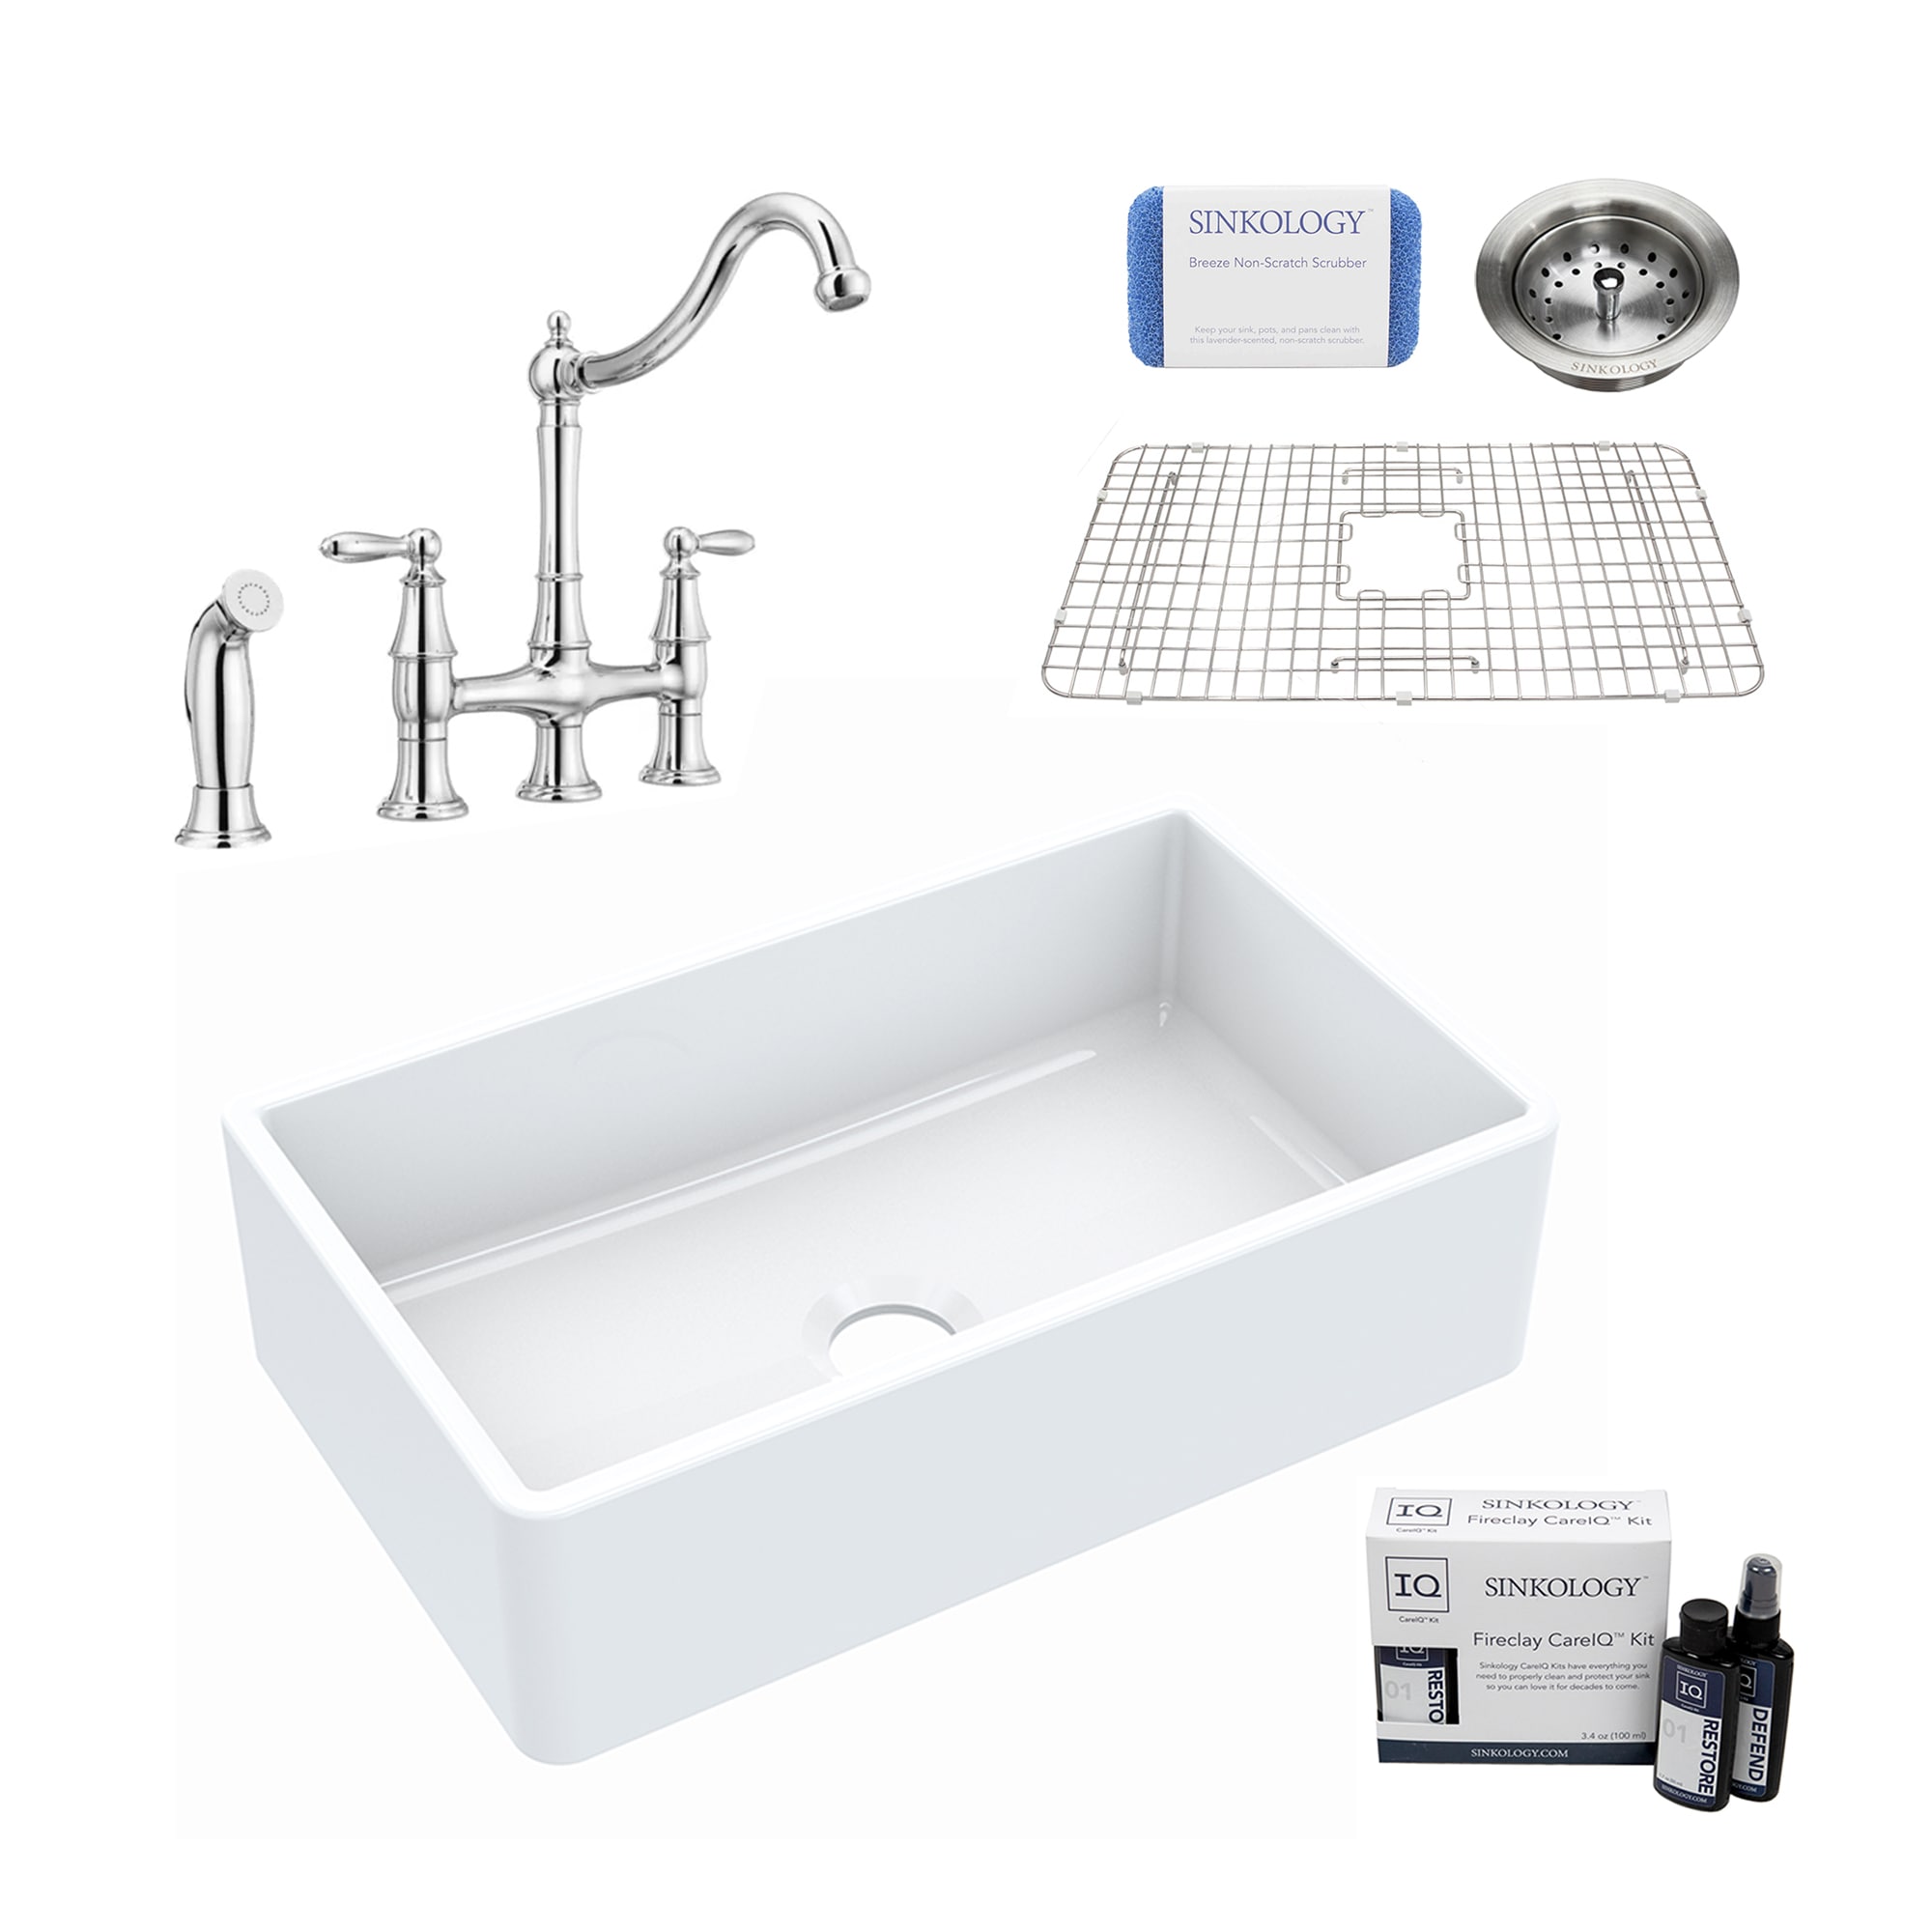 Turner Farmhouse Apron Front 30-in x 18-in Crisp White Fireclay Single Bowl Kitchen Sink All-in-one Kit Stainless Steel | - SINKOLOGY SK404-30-COC